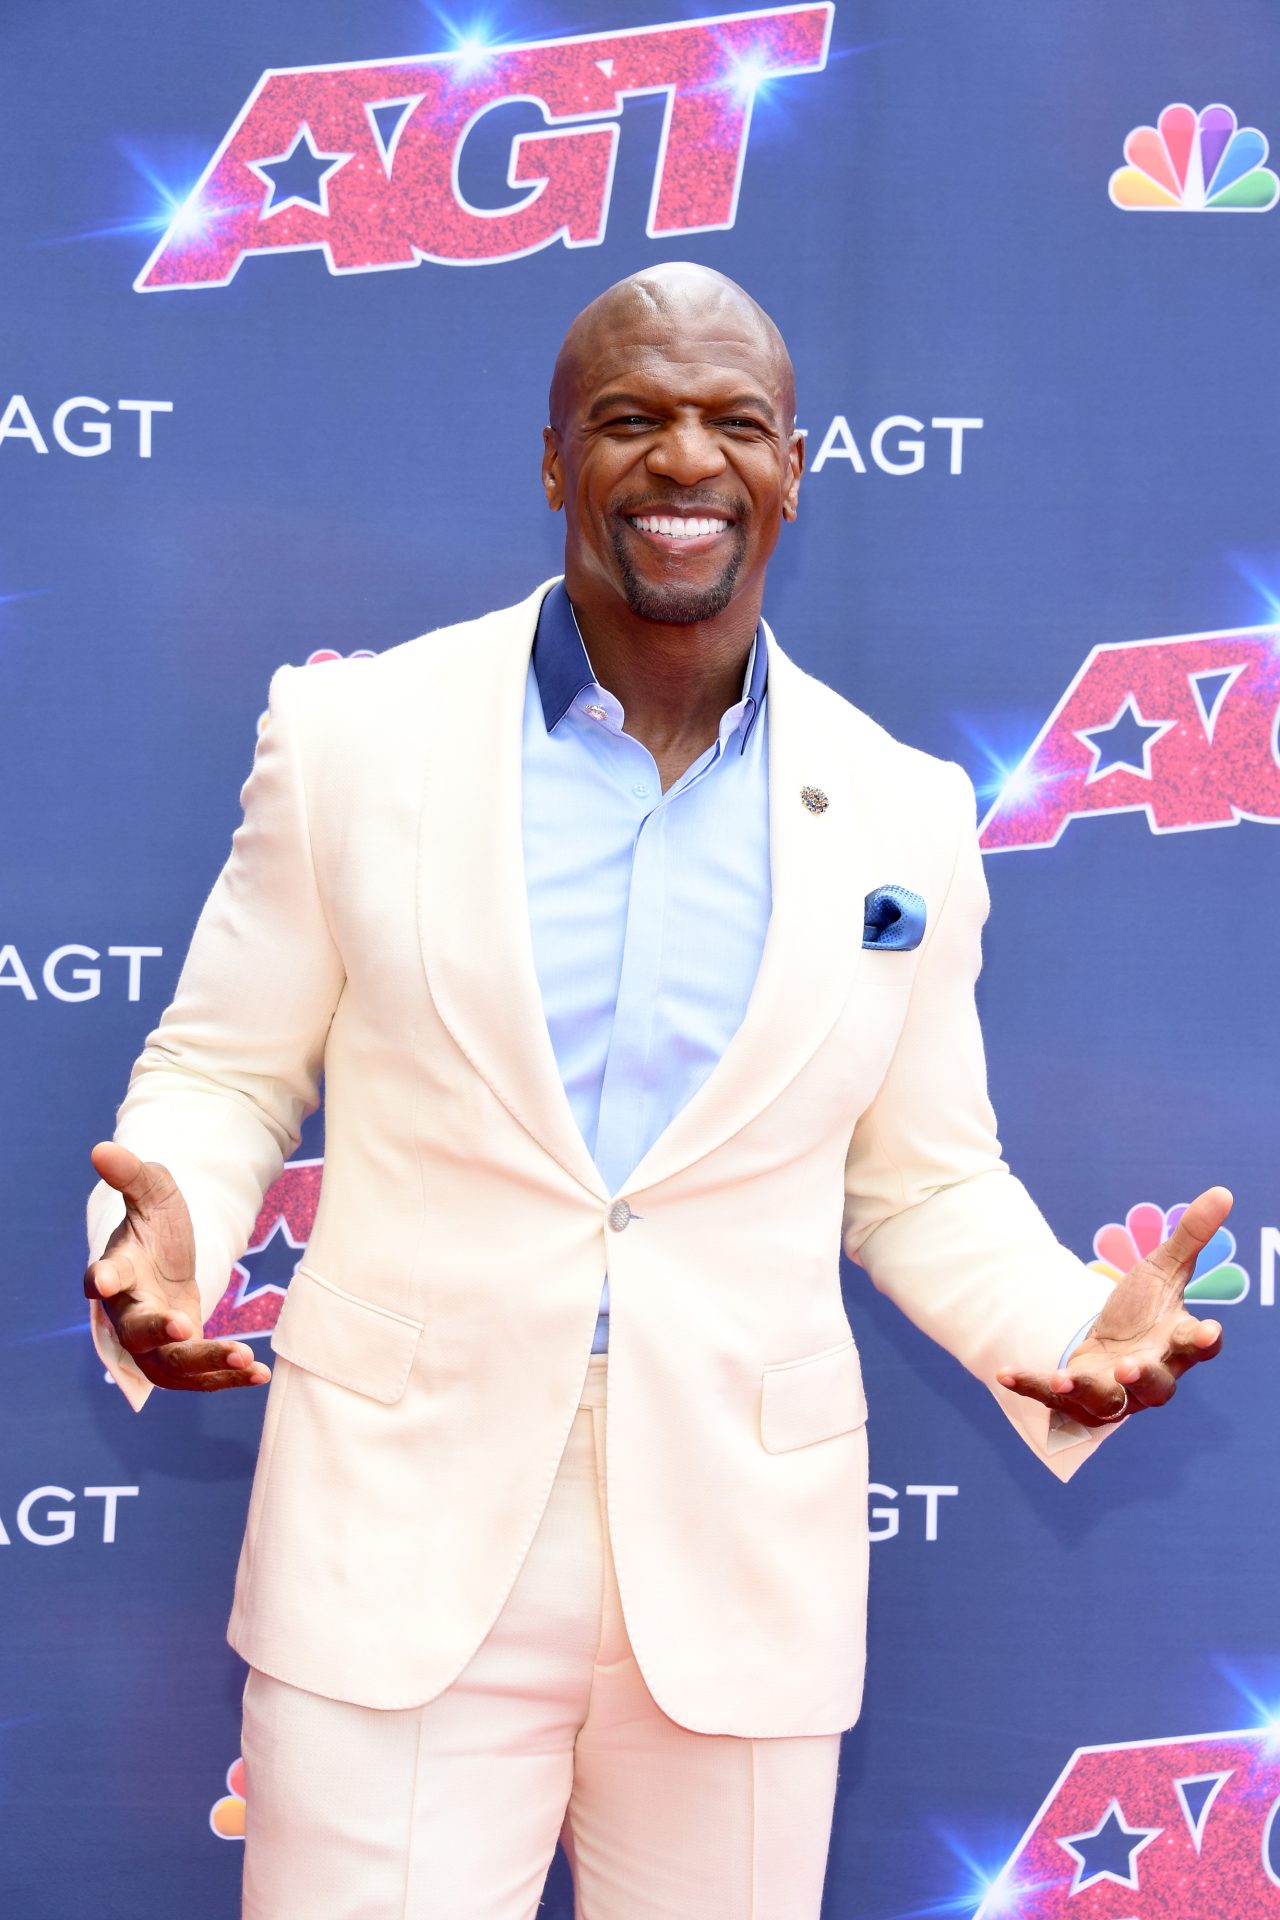 Terry Crews Apologizes For Controversial Black Lives Matter Tweets